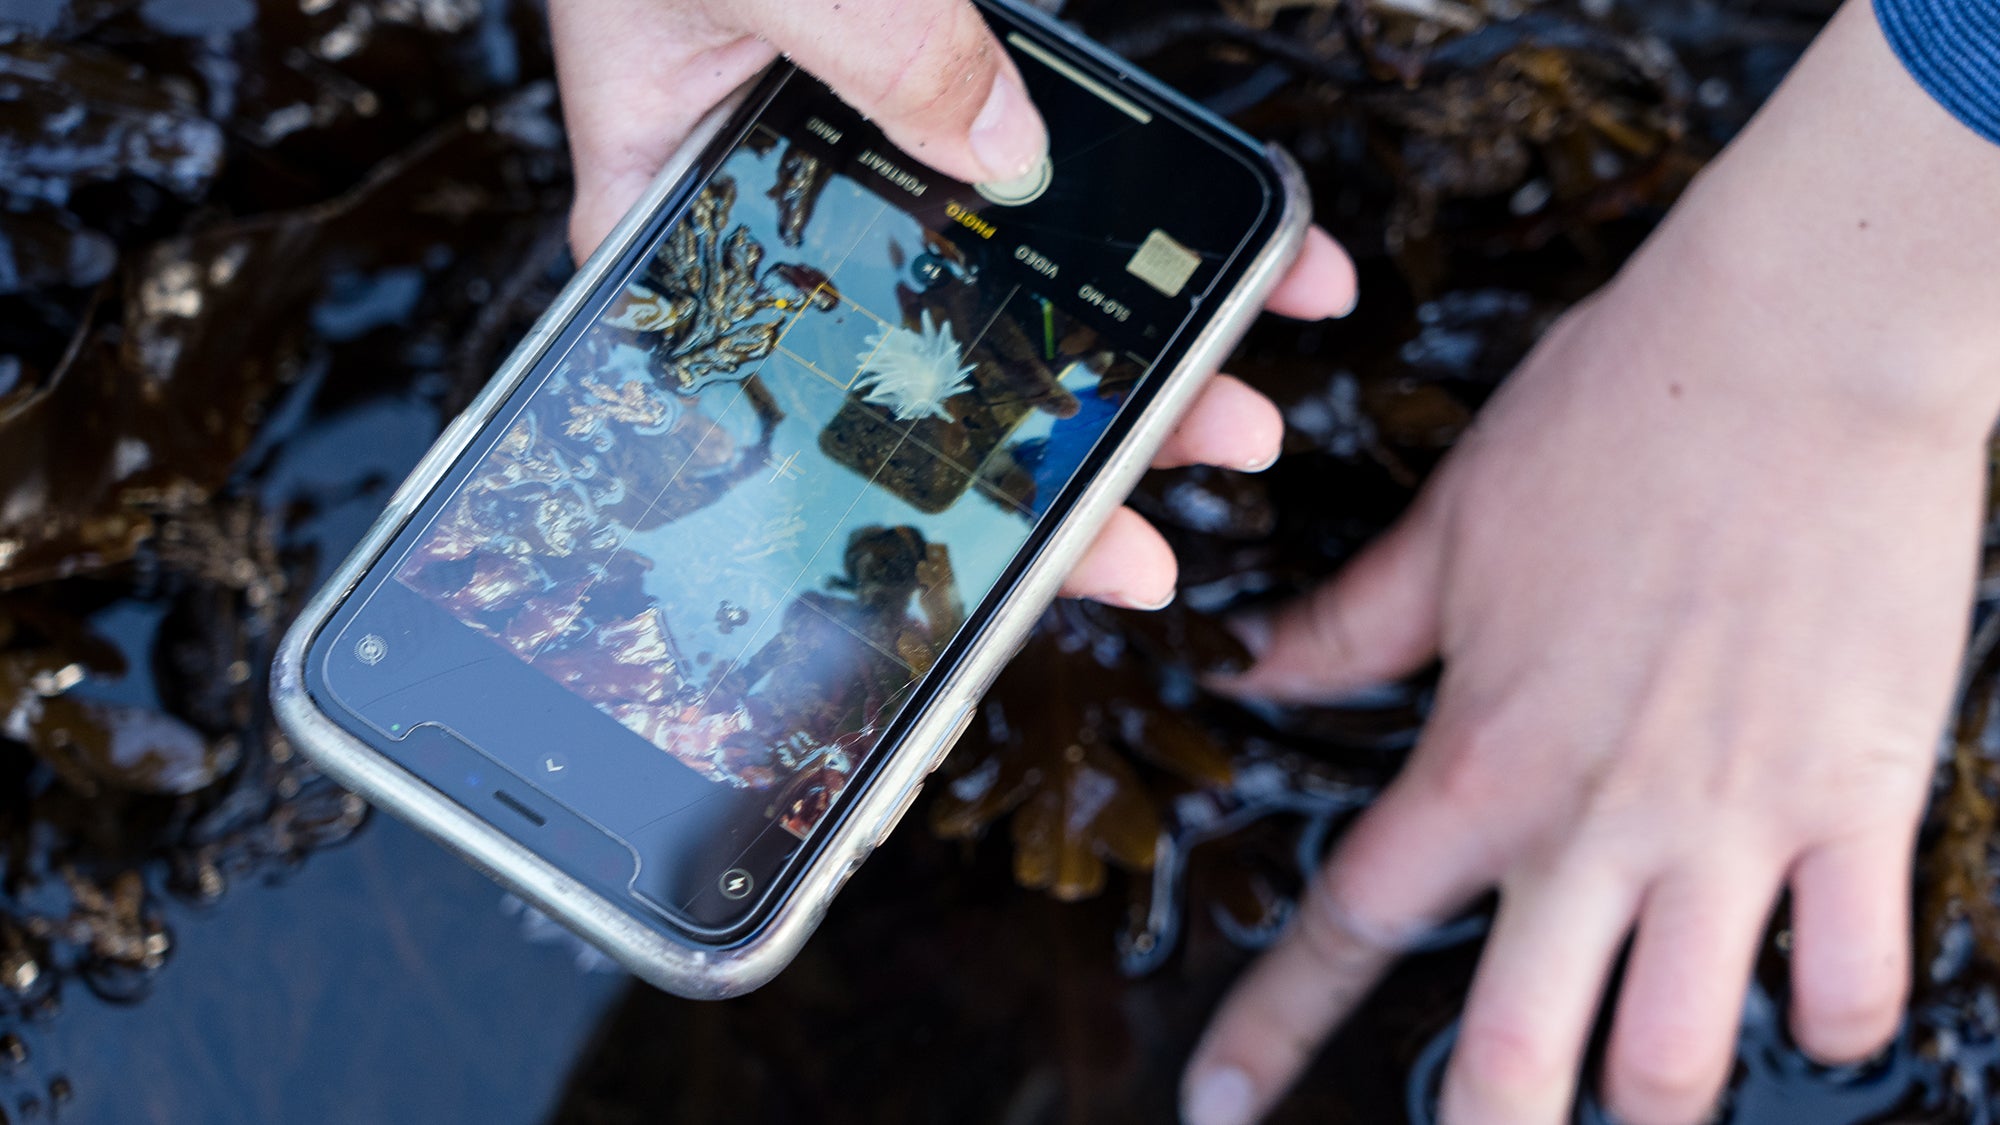 Close-up of hands holding smart phone with photo of a sea slug.